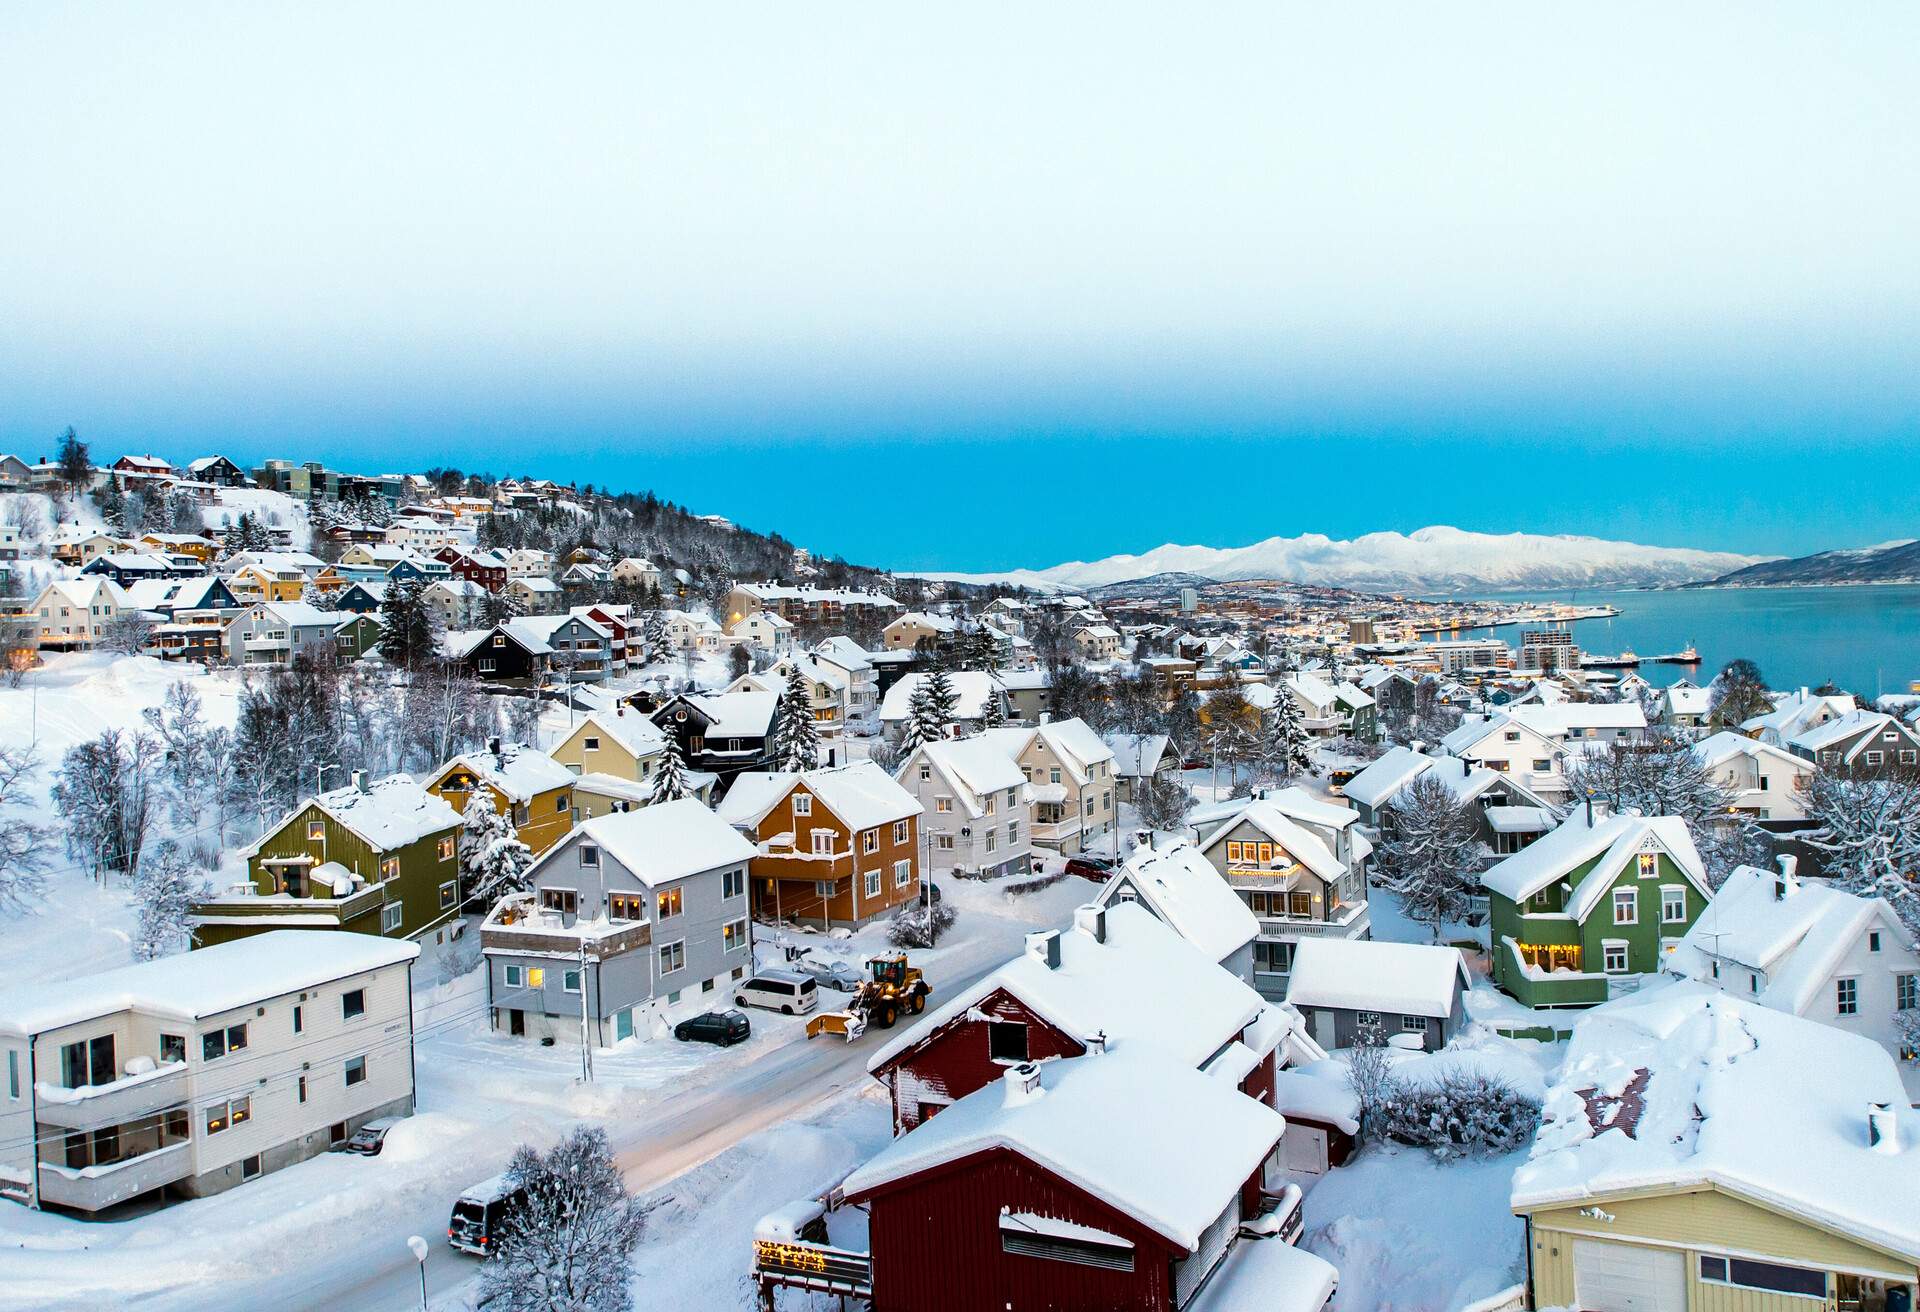 A coastal city with colourful houses and buildings covered in snow beneath a milky blue winter sky.